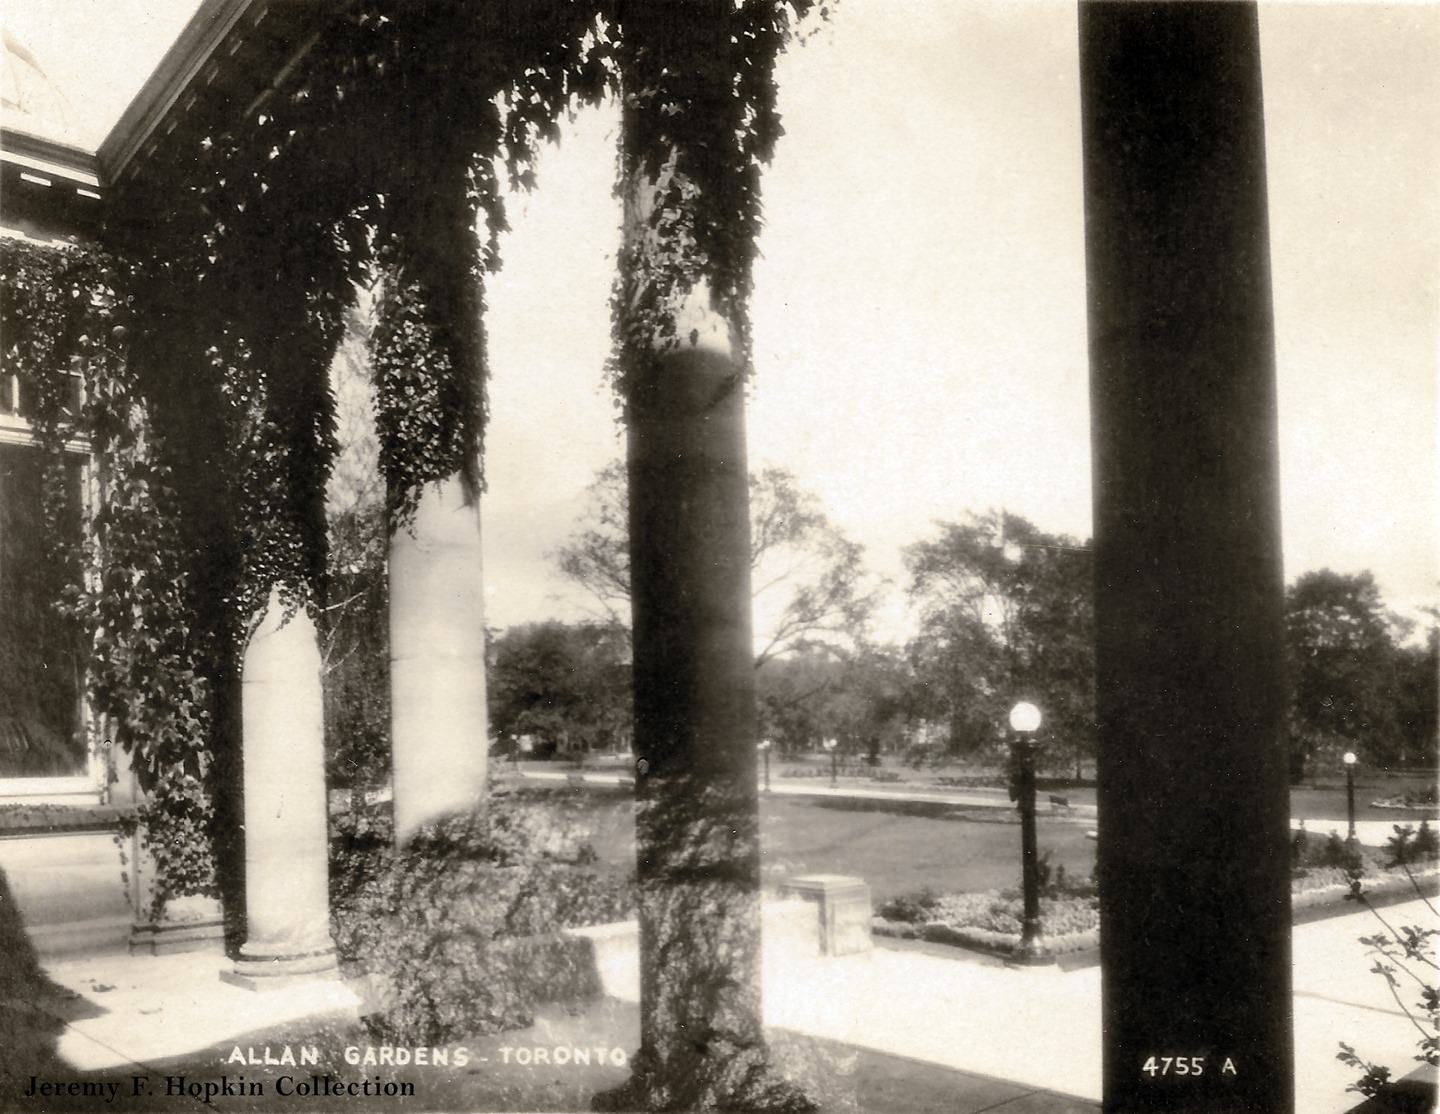 Another view from within Allan Gardens, 1920.